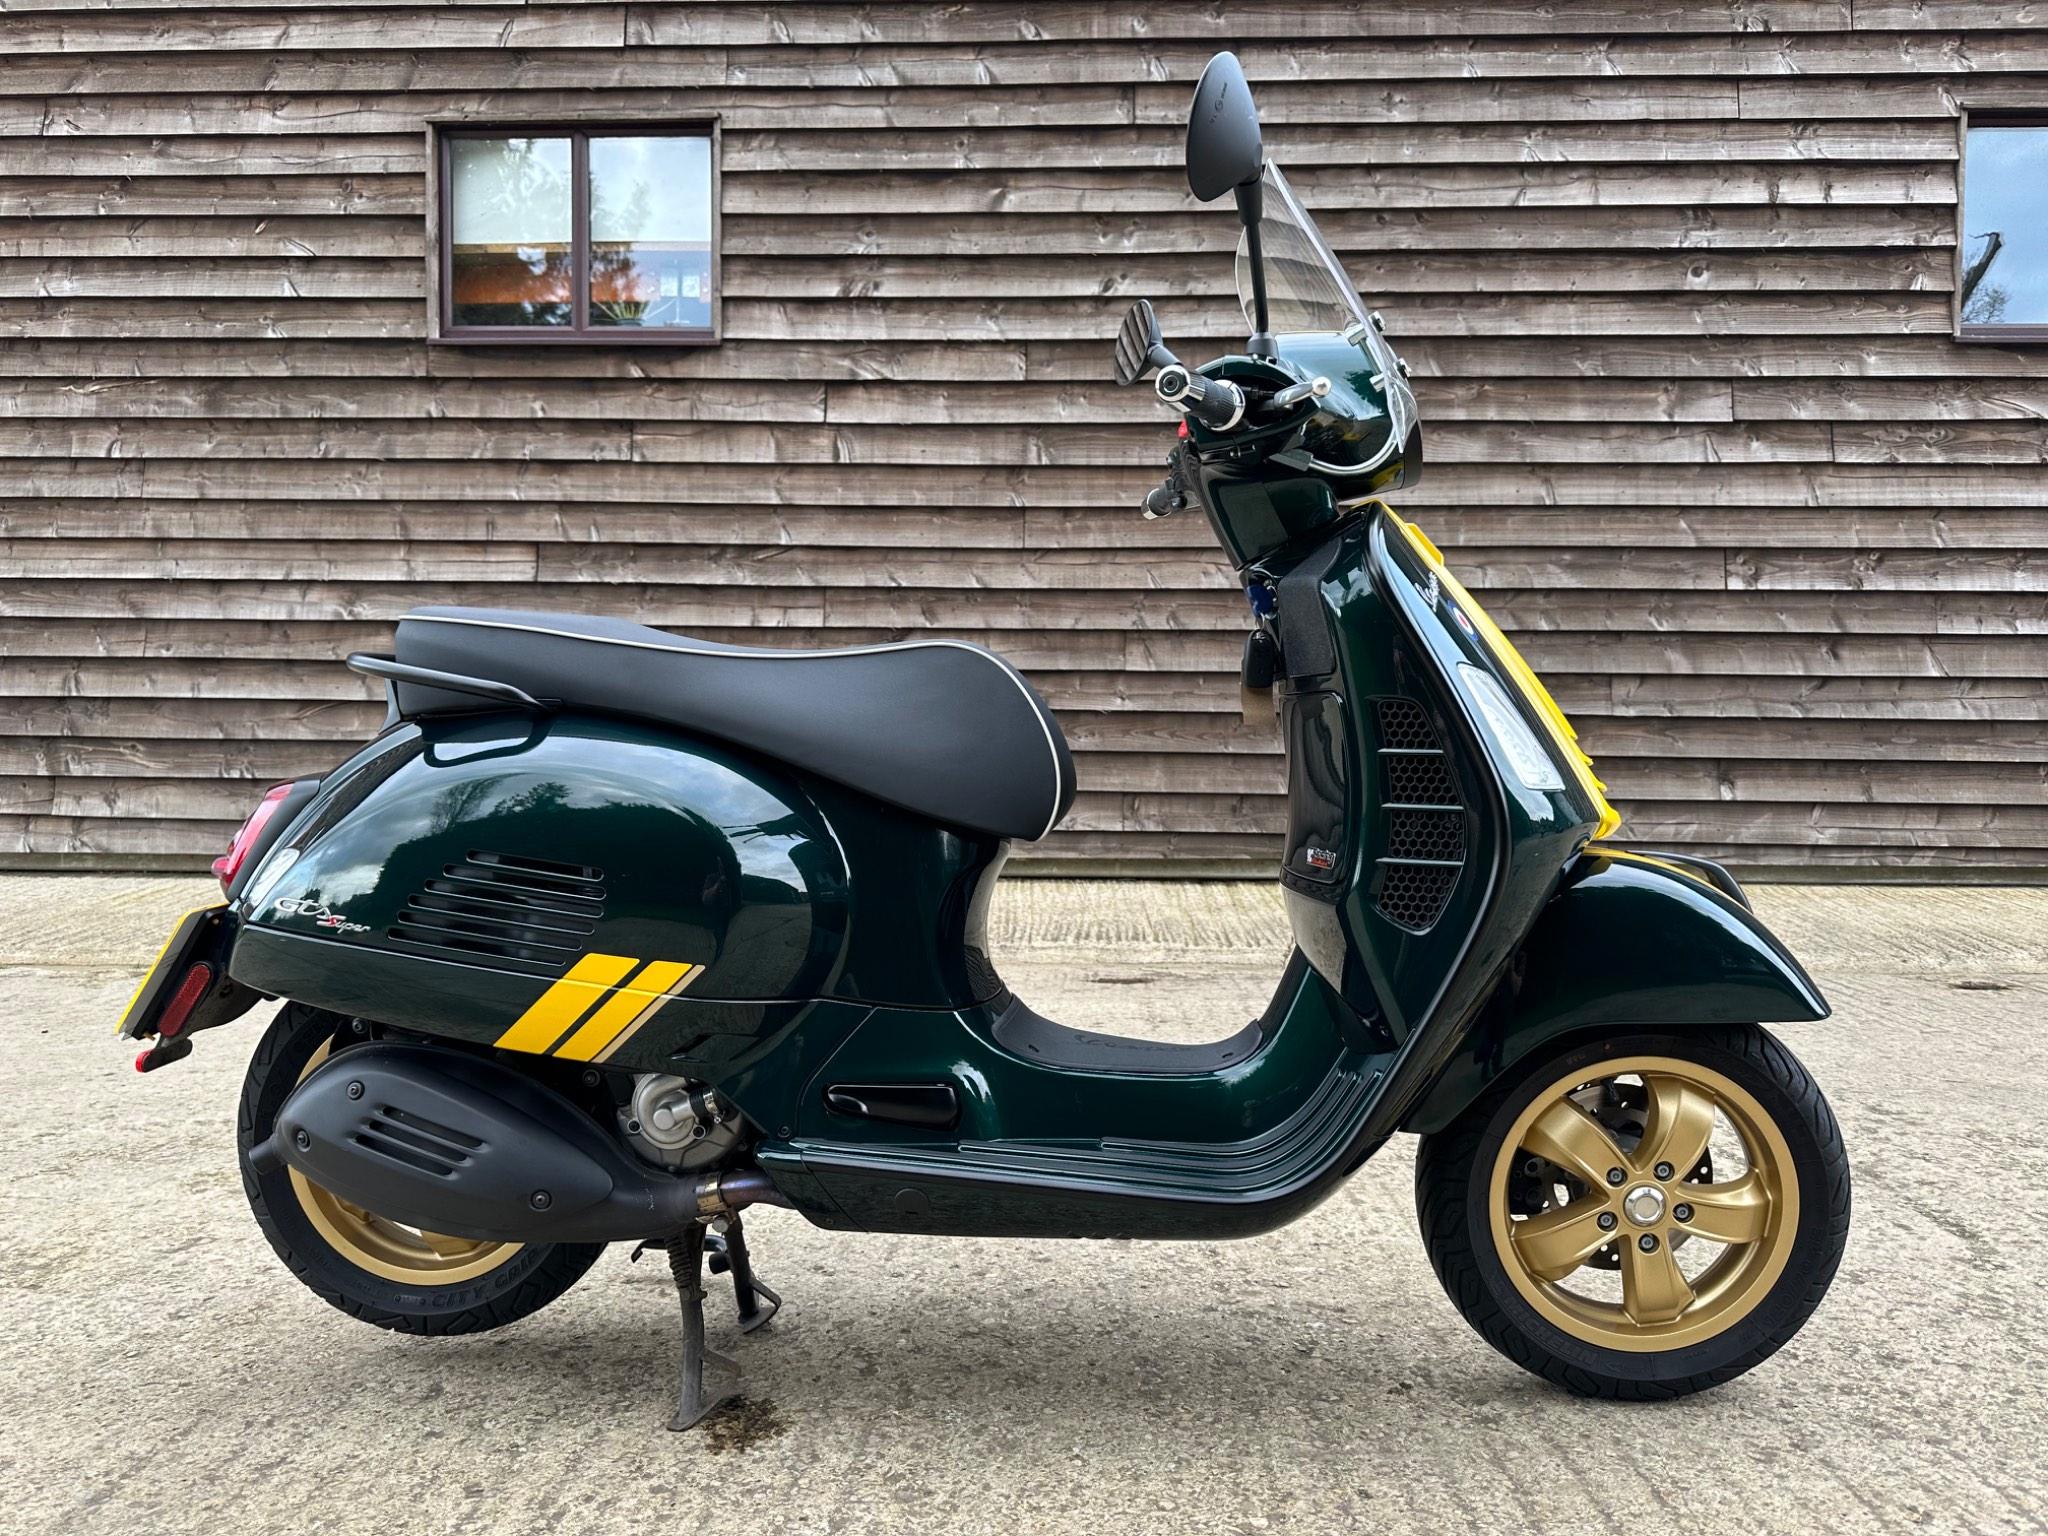 2022 Piaggio Vespa GTS 300 hpe Super Racing Sixties ABS From £75.18 per month 